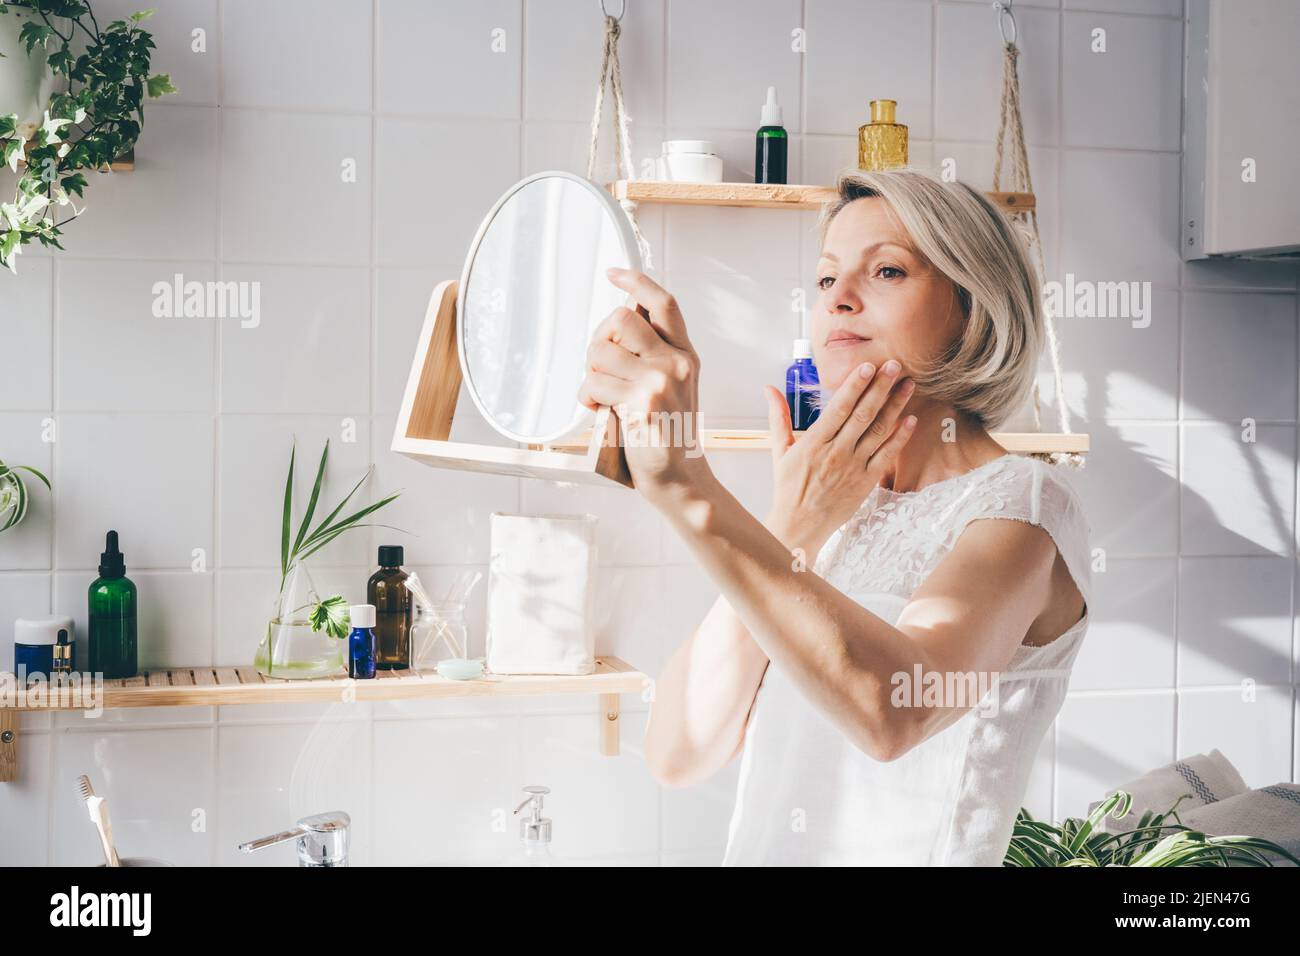 Beautiful middle-aged woman taking care of her face and looking in the mirror. White eco-friendly bathroom interior. Natural light. Wellness Stock Photo